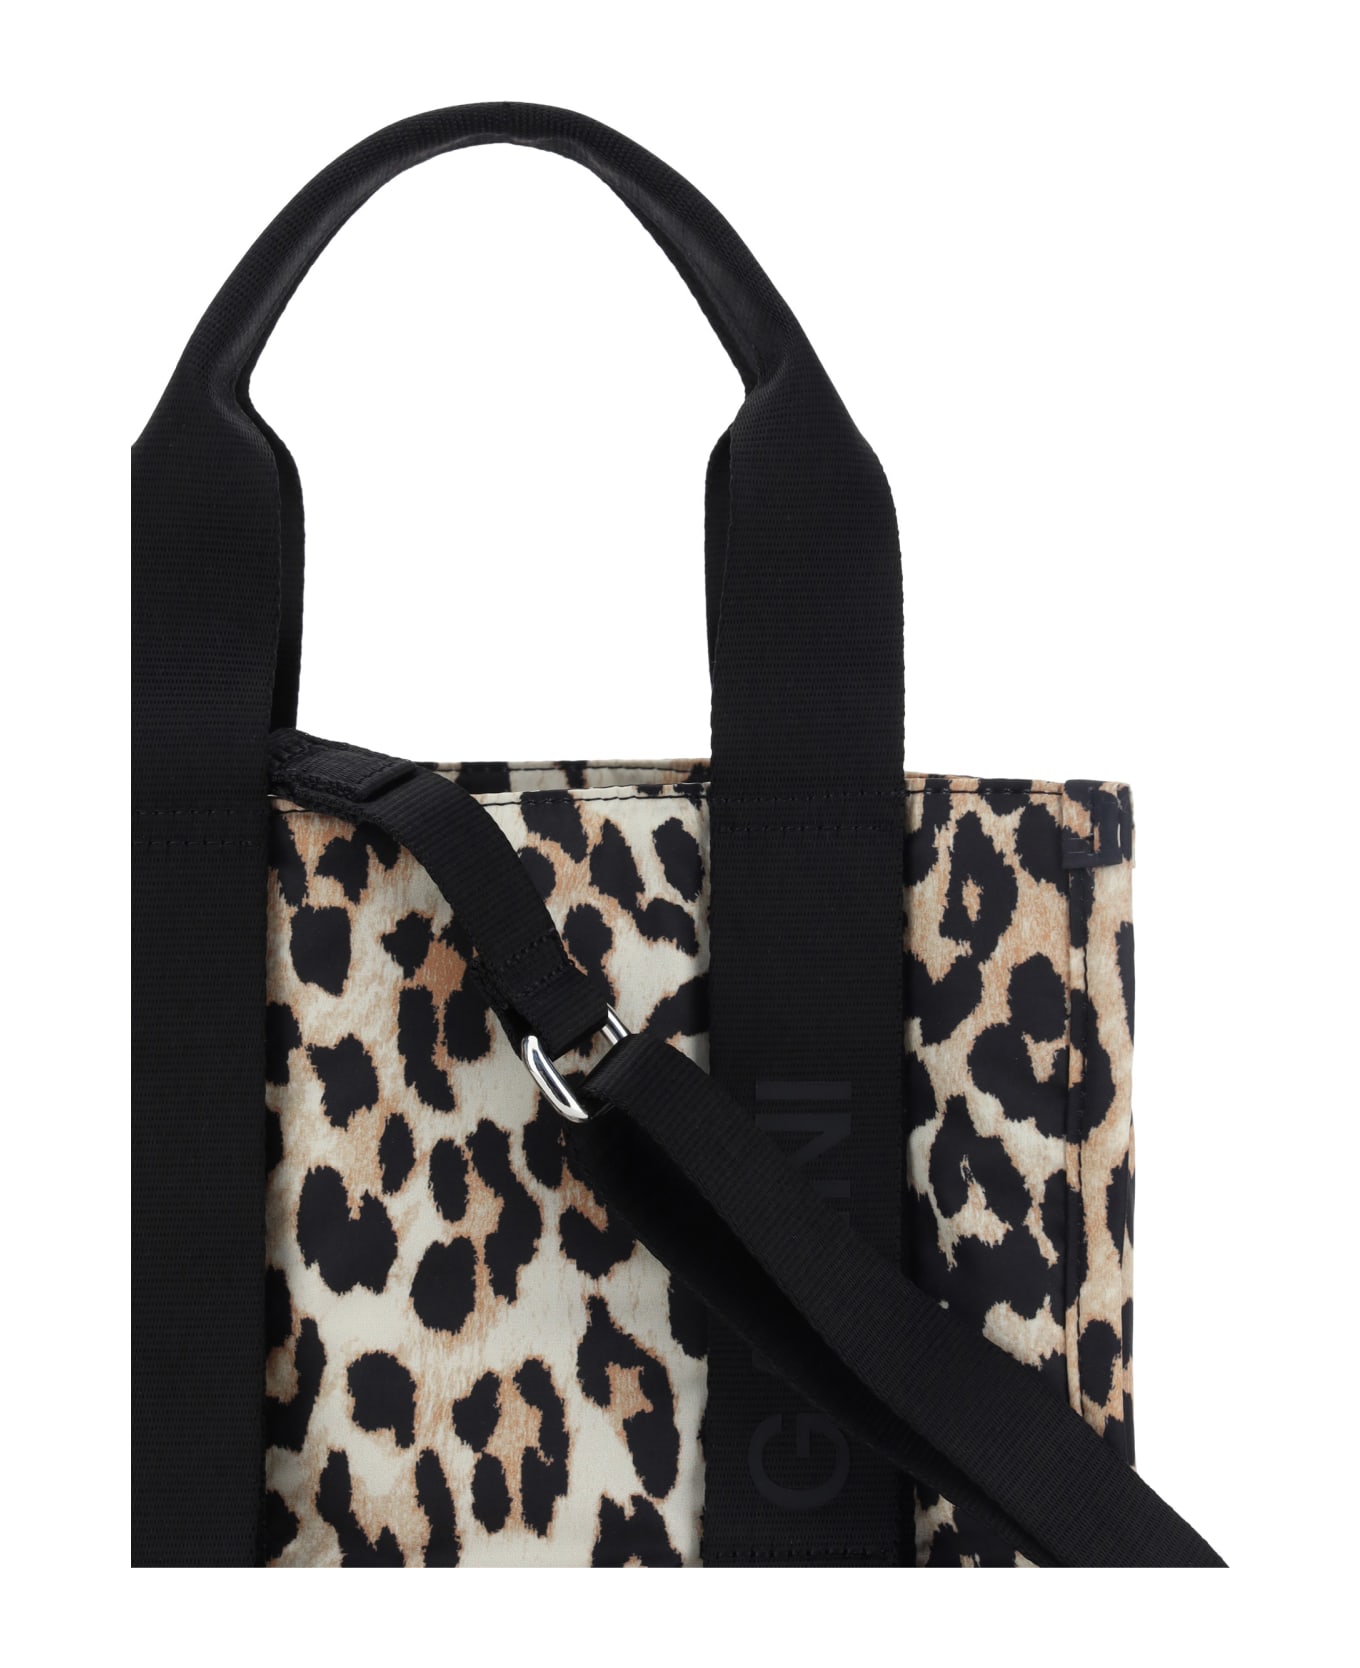 Ganni Recycled Tech Tote Bag - Leopard